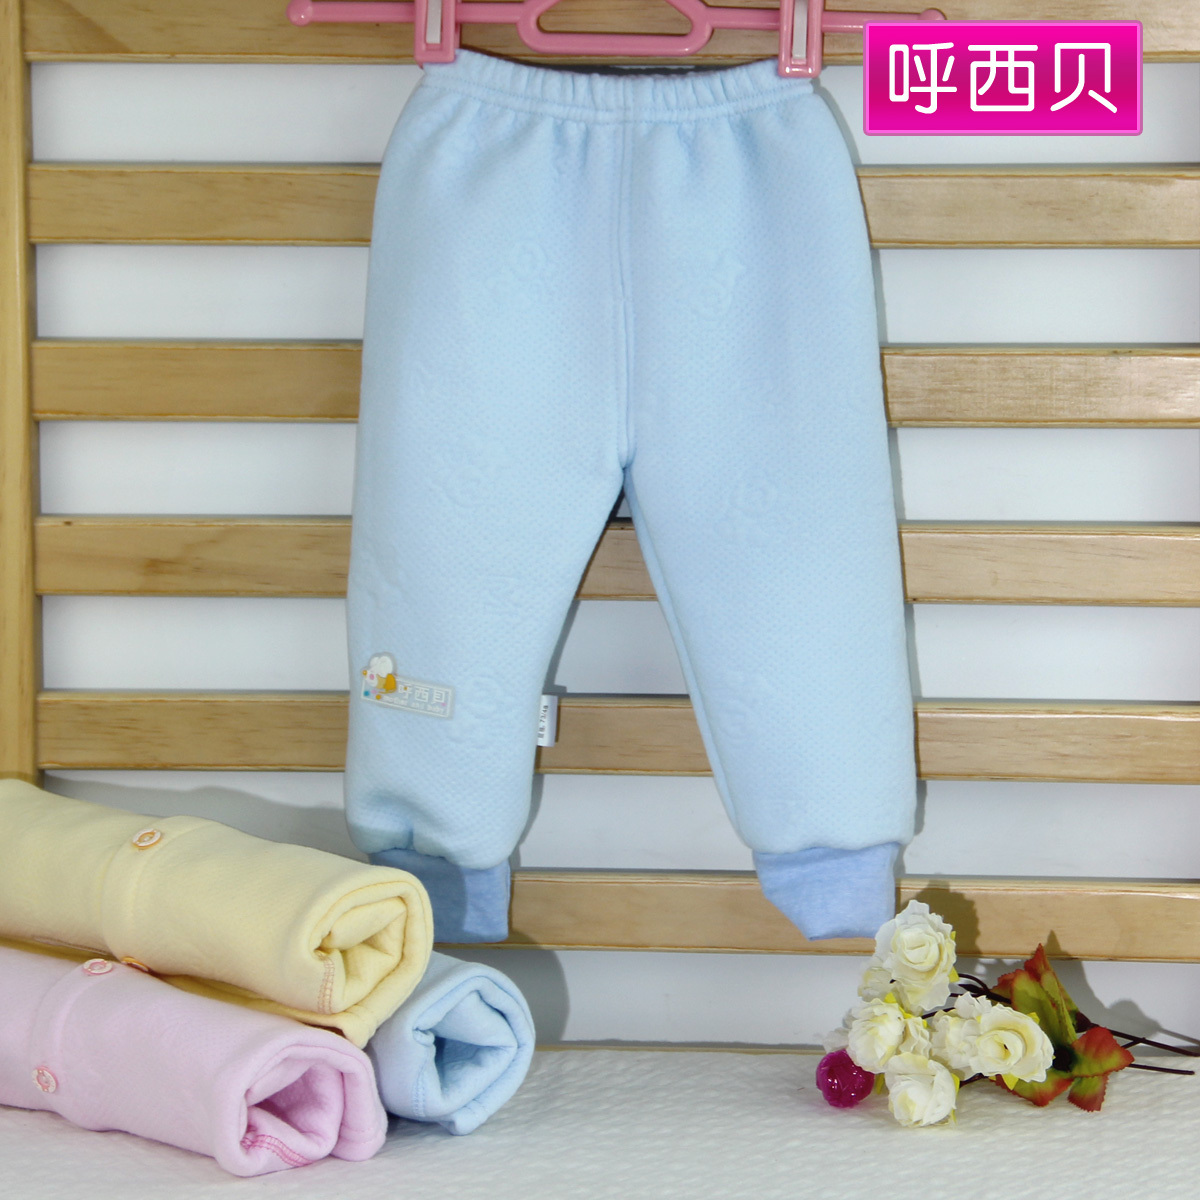 Autumn and winter child warm pants baby cotton-padded open file dual pants 100% cotton warm pants 326